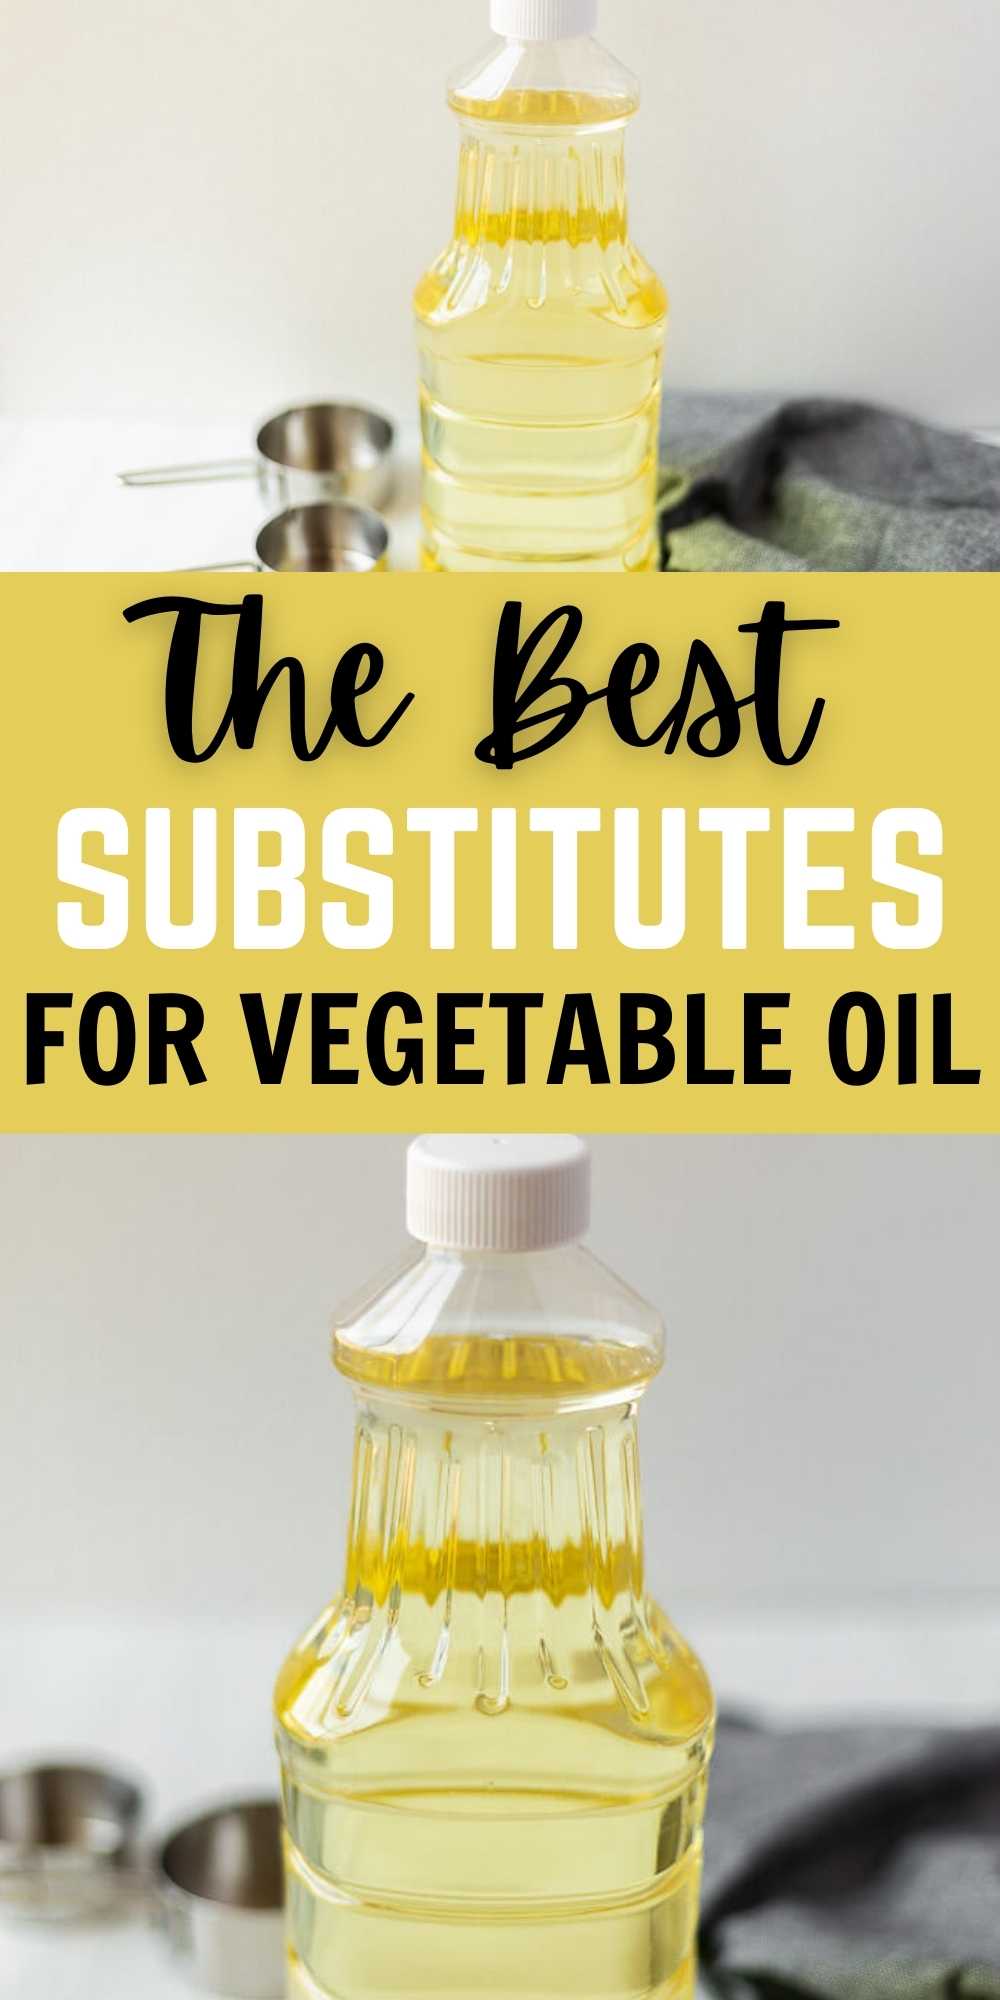 We have gathered The Best Vegetable Oil Substitutes for all your baking and cooking recipes. Theses substitutes will help when you run out. These substitutes work in baking, in brownies, in cake and in cake mixes too!  You’ll love these easy ingredient substitution ideas! #eatingonadime #ingredientsubstitutions #vegetableoil #ingredients 
